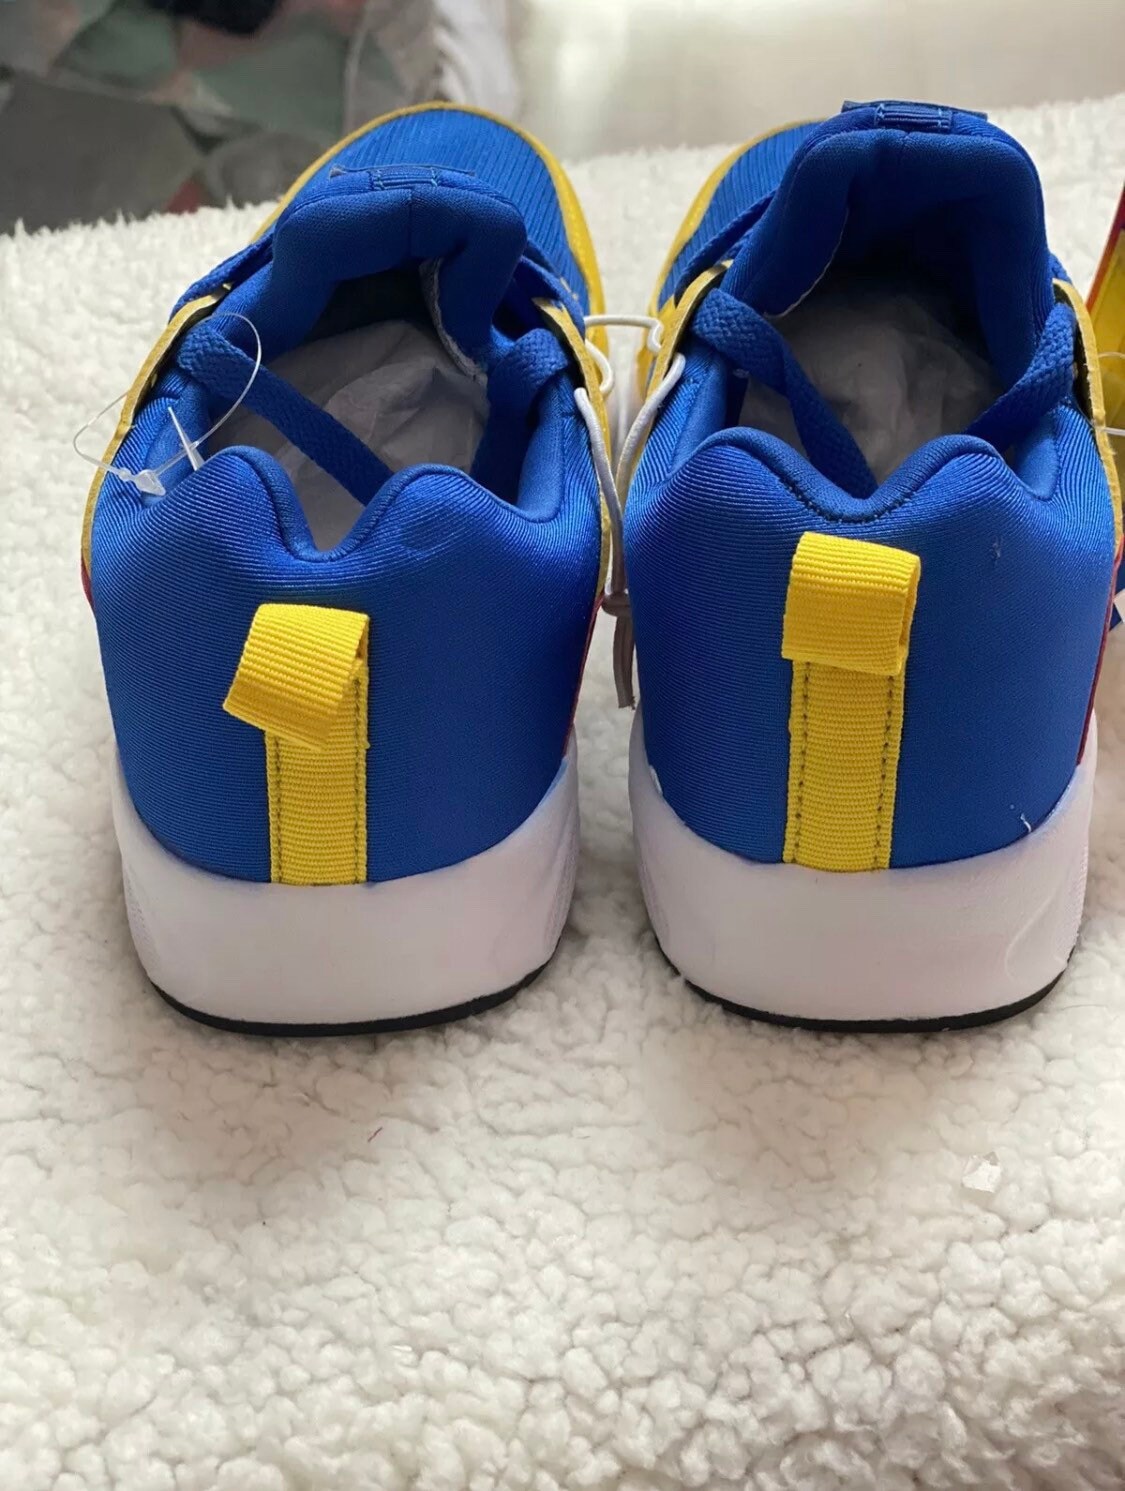 Shoes lidl Sneakers Limited Edition 2020-size EU 38/UK 5 NEW RARE UNISEX 